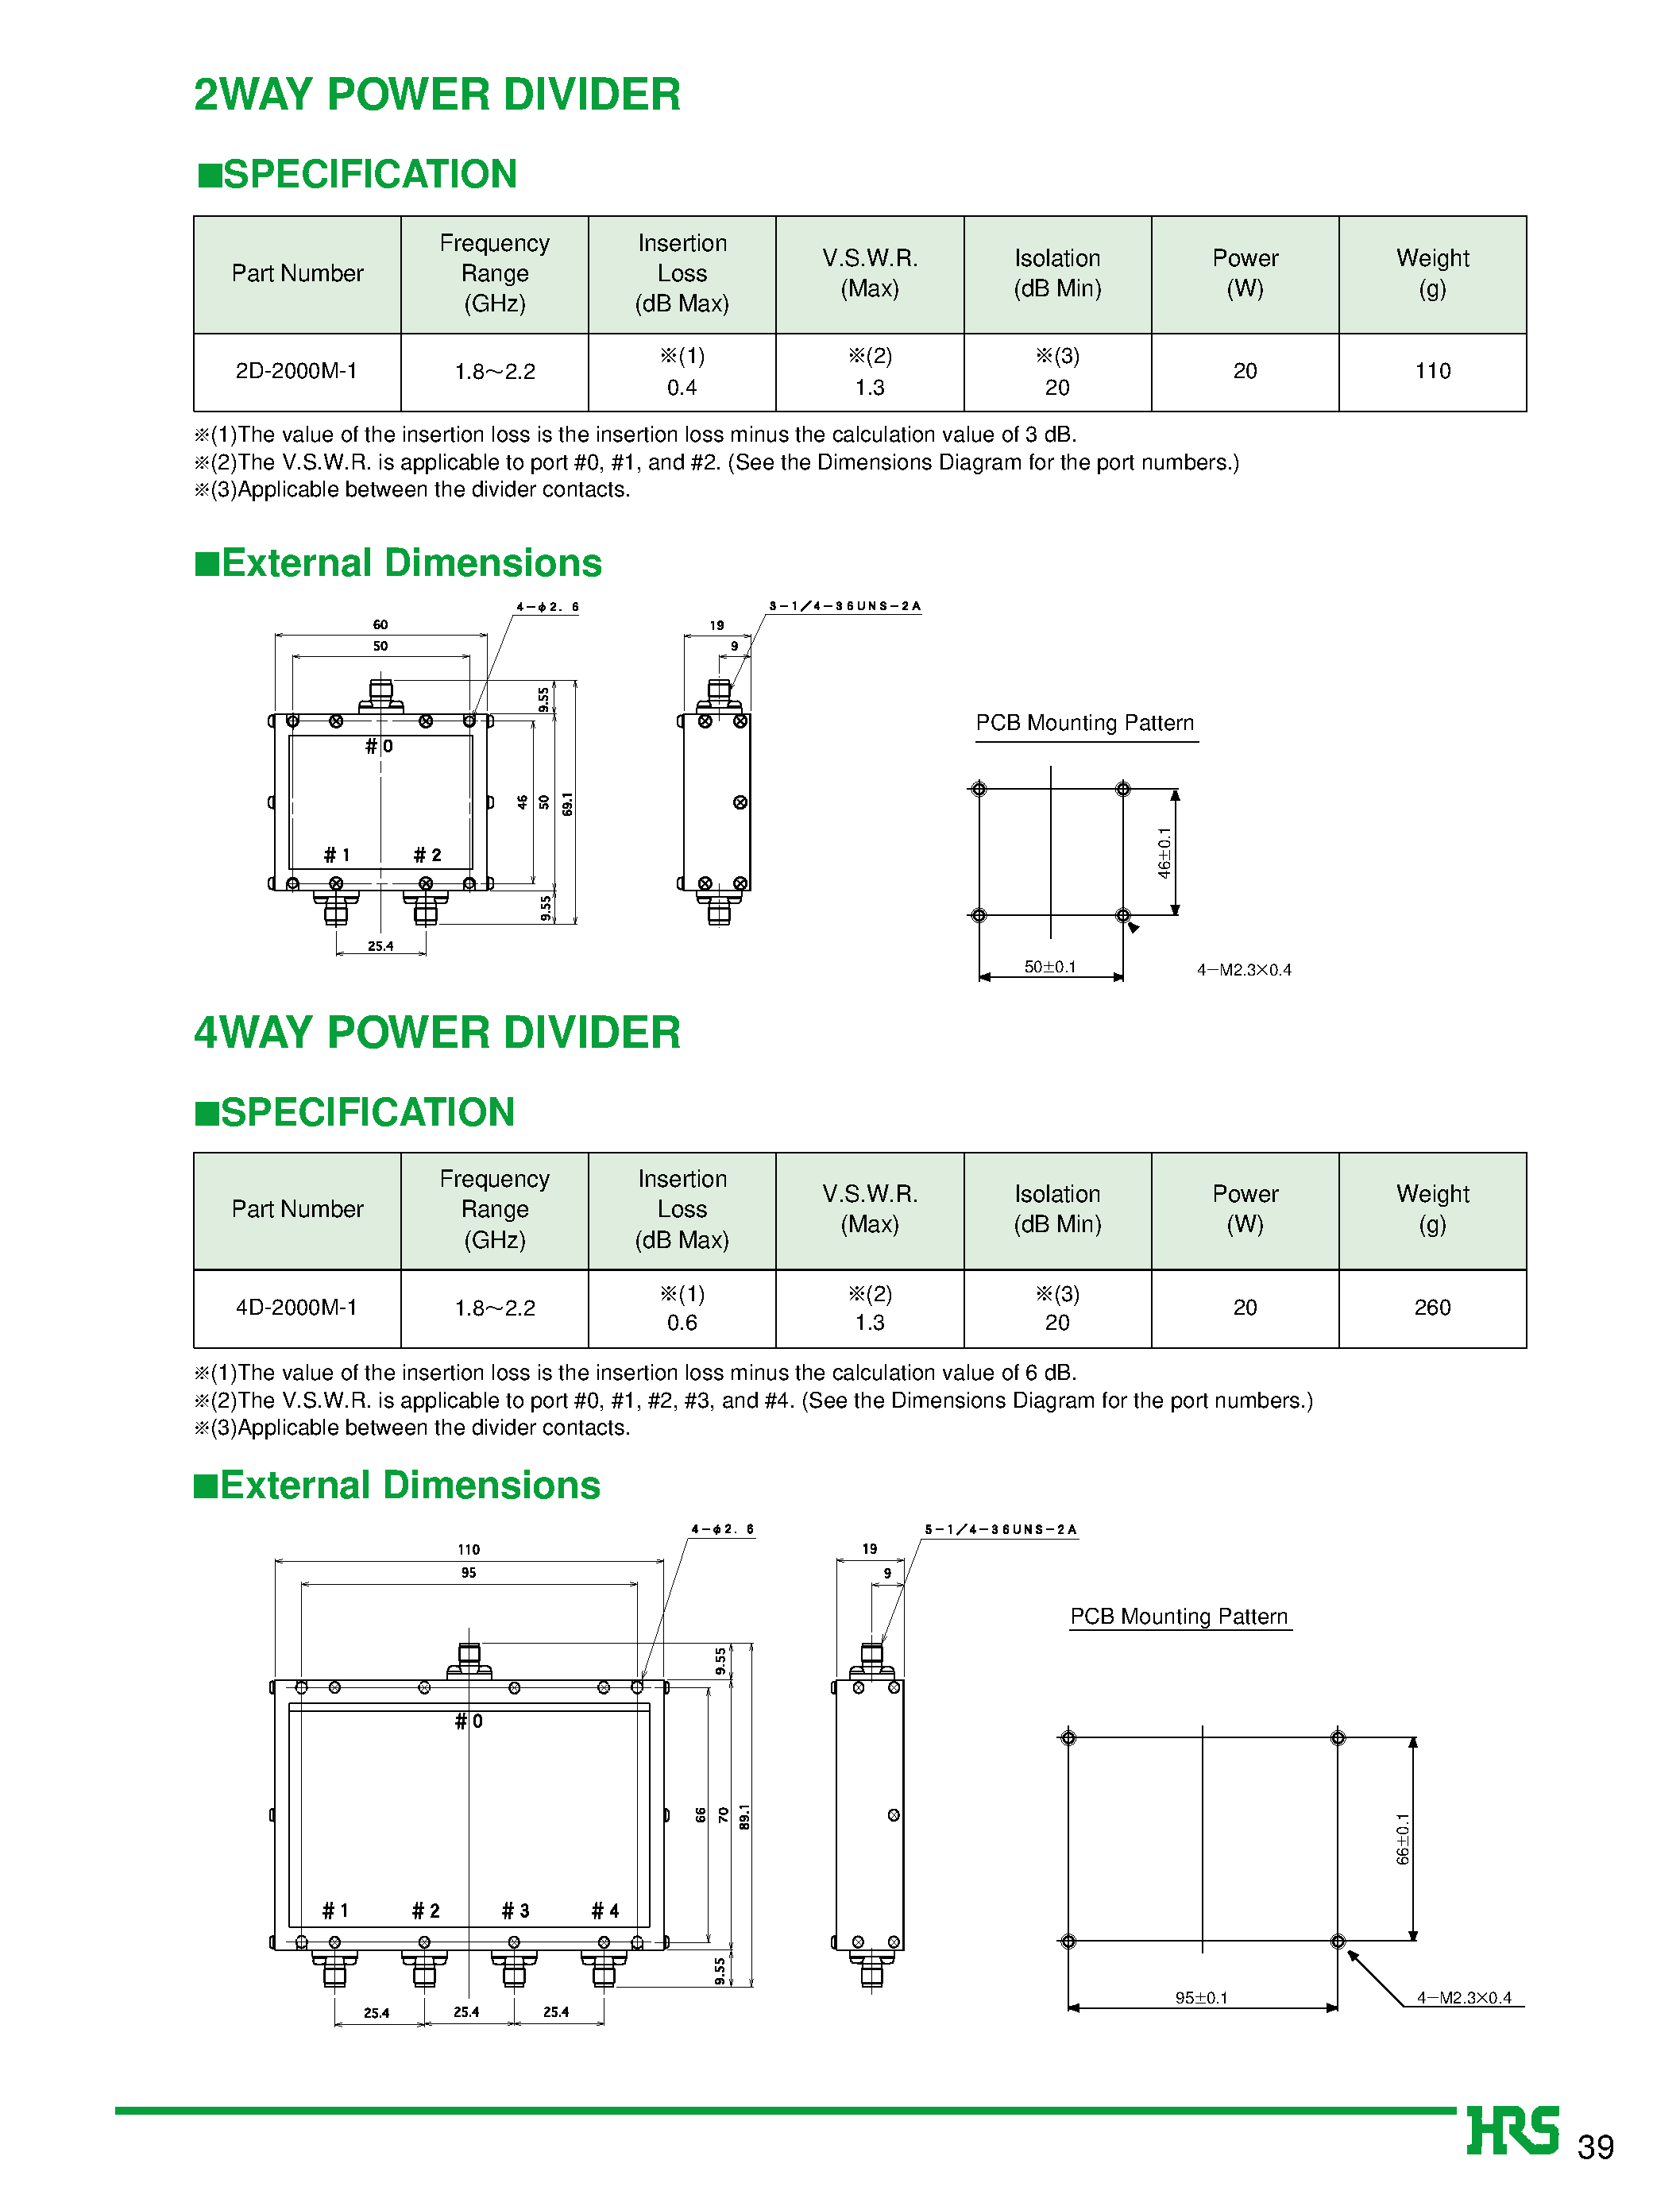 Даташит 2D-2000M-2 - 2 GHz Band Power Dividers/Combiners страница 2